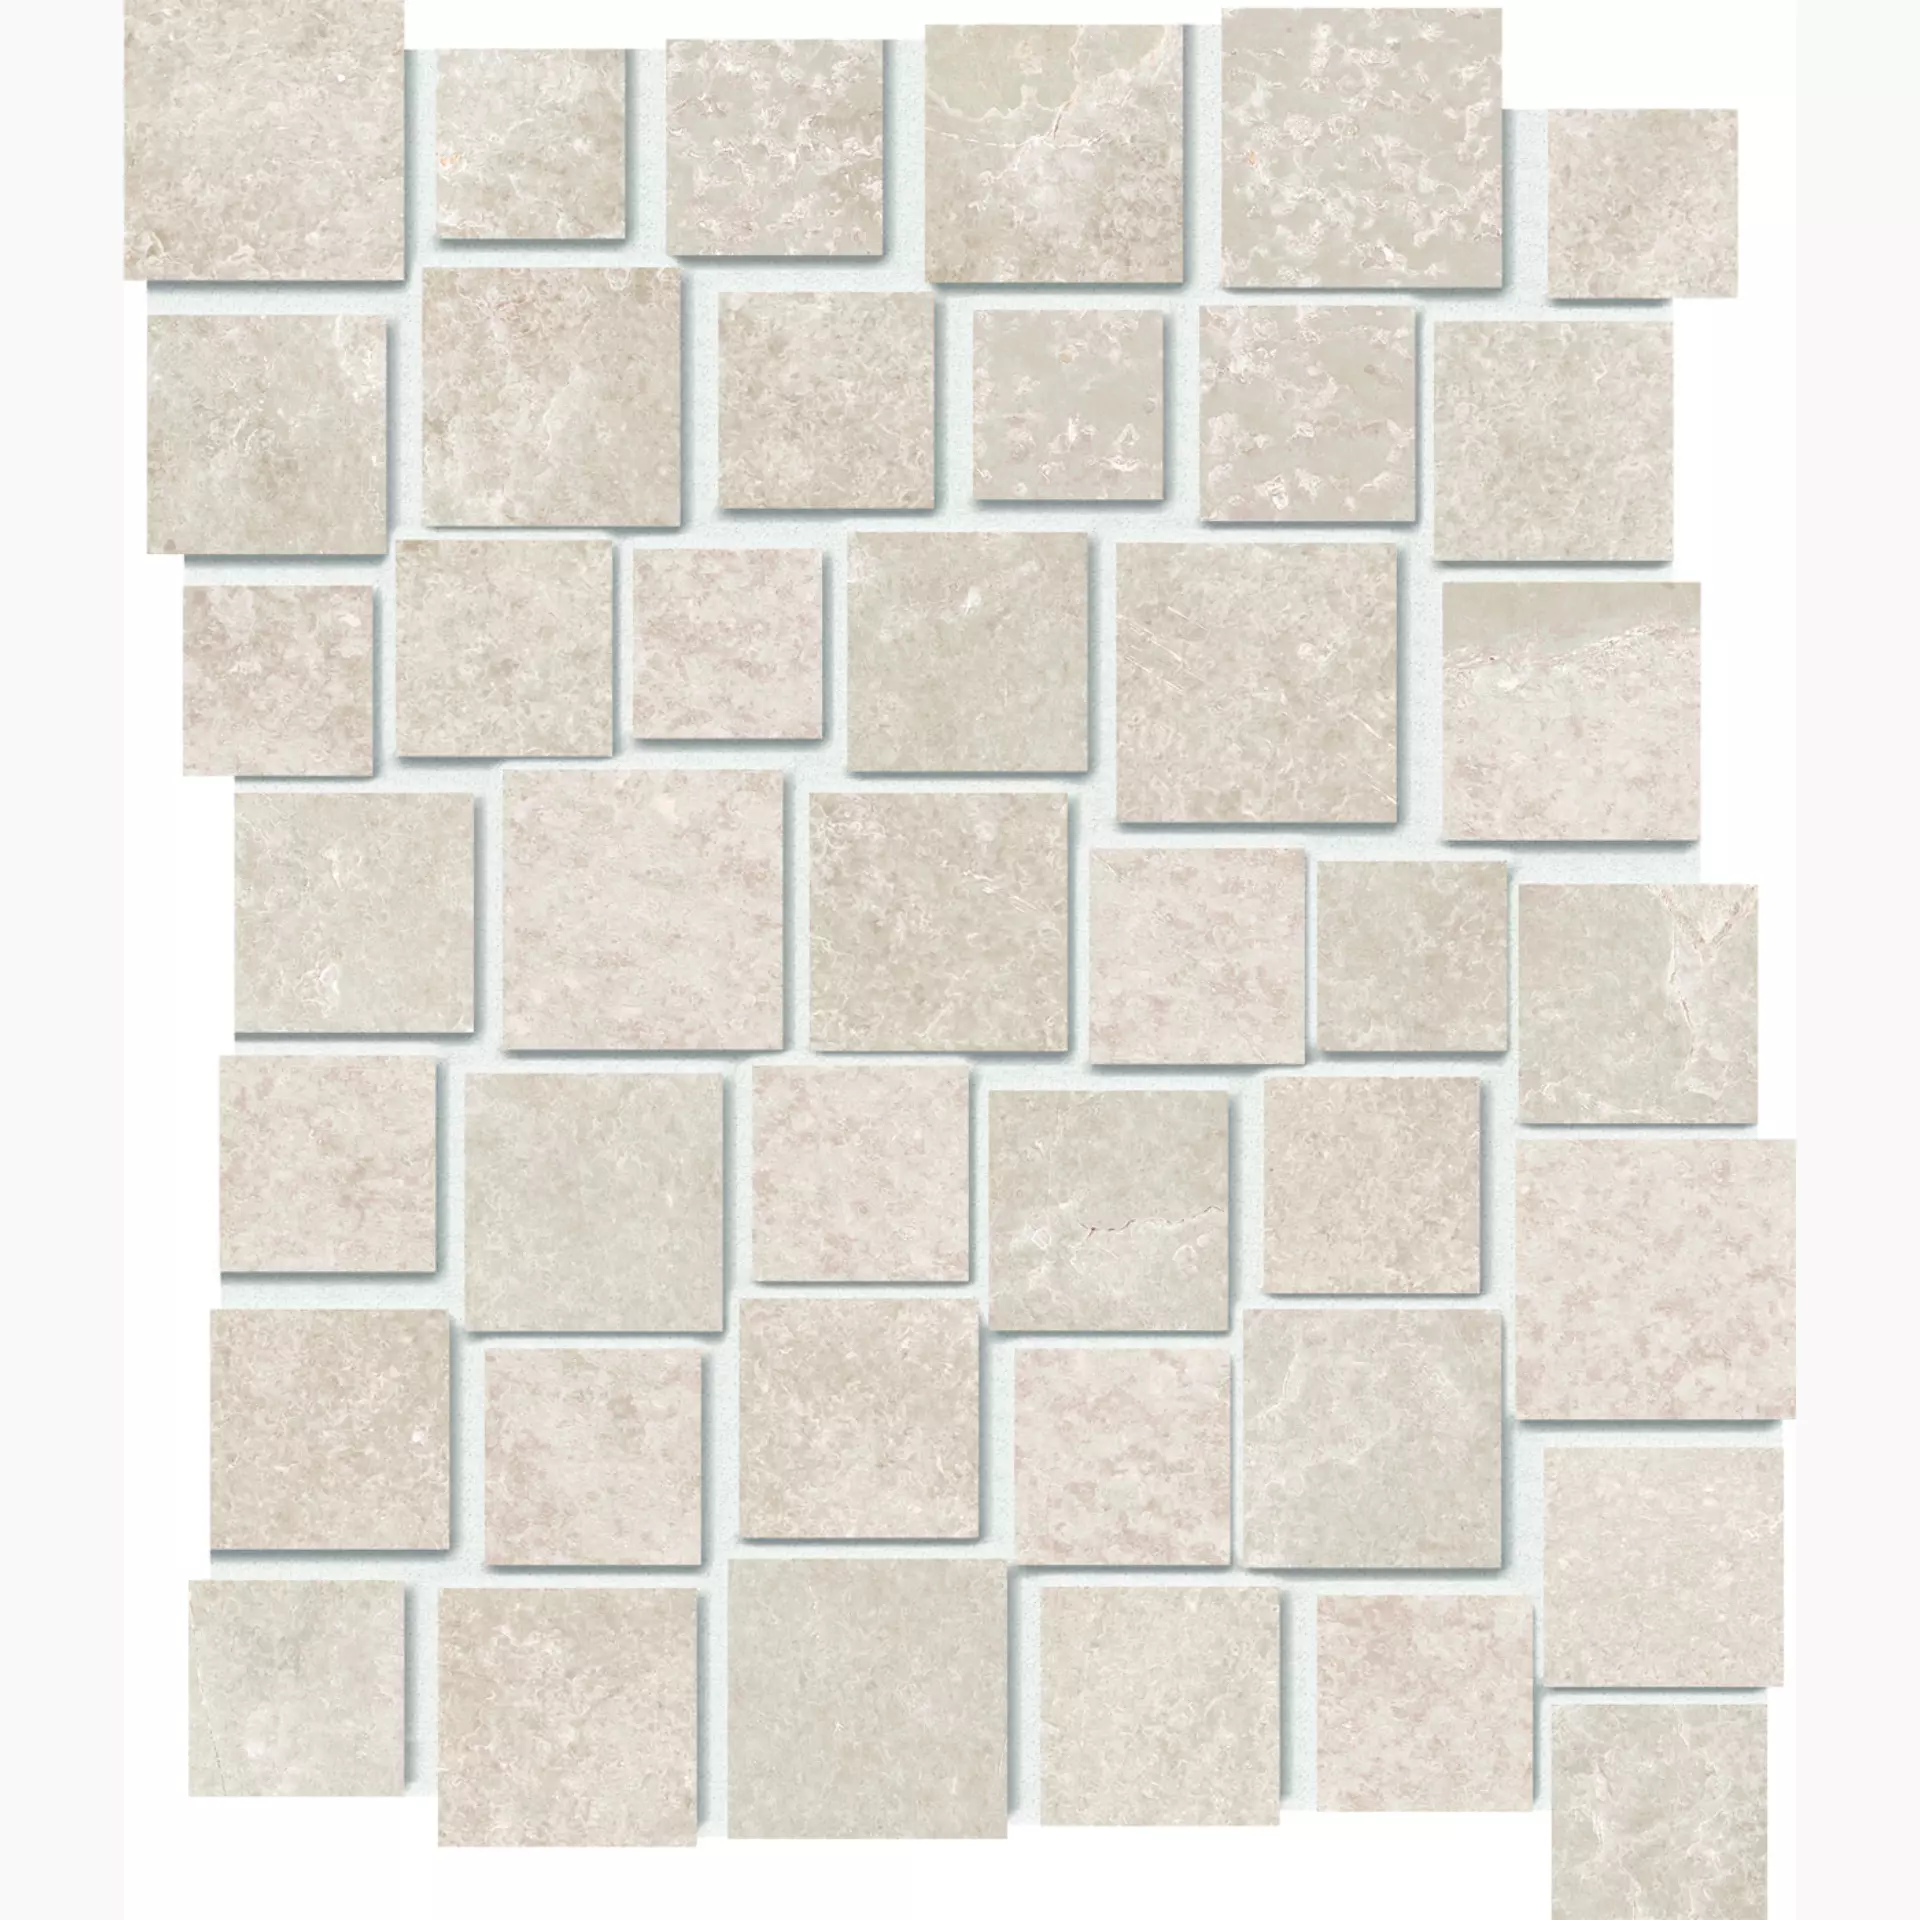 Provenza Groove Hot White Naturale Mosaic Penta E3GE 28,7x33cm rectified 9,5mm